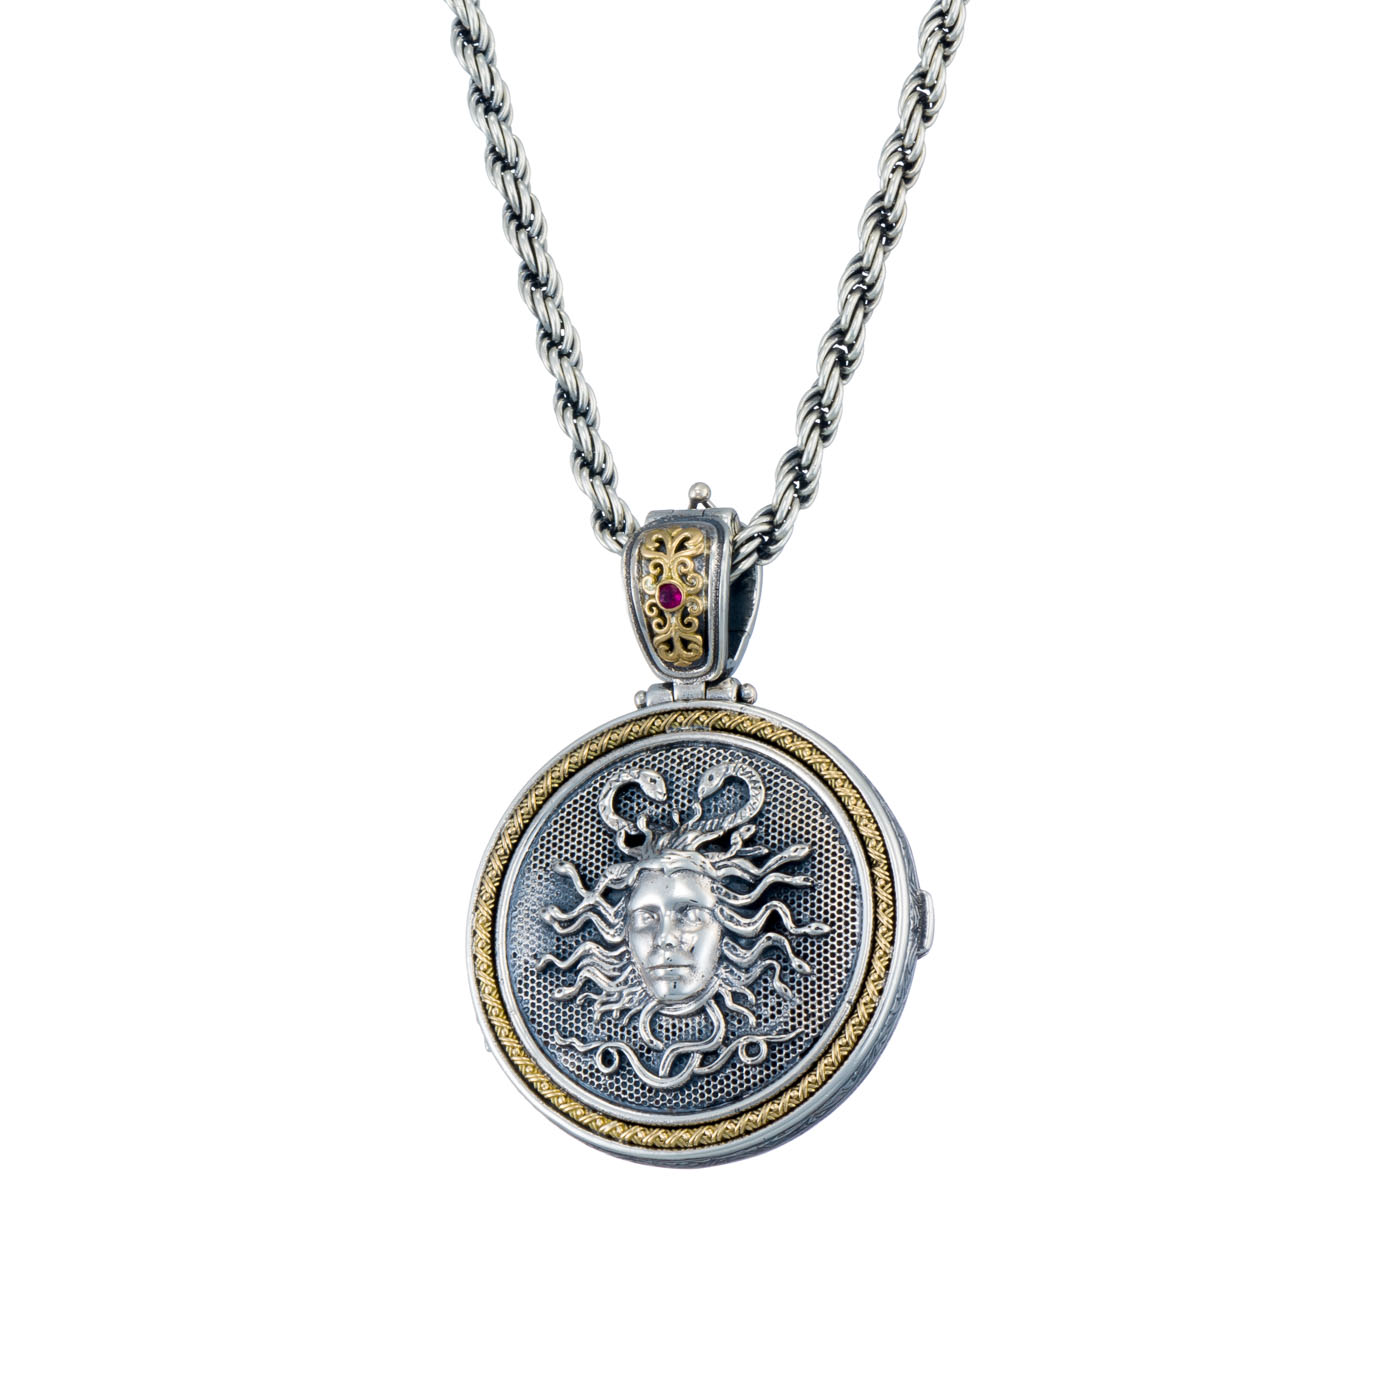 Medousa locket pendant in 18K Gold and Sterling silver